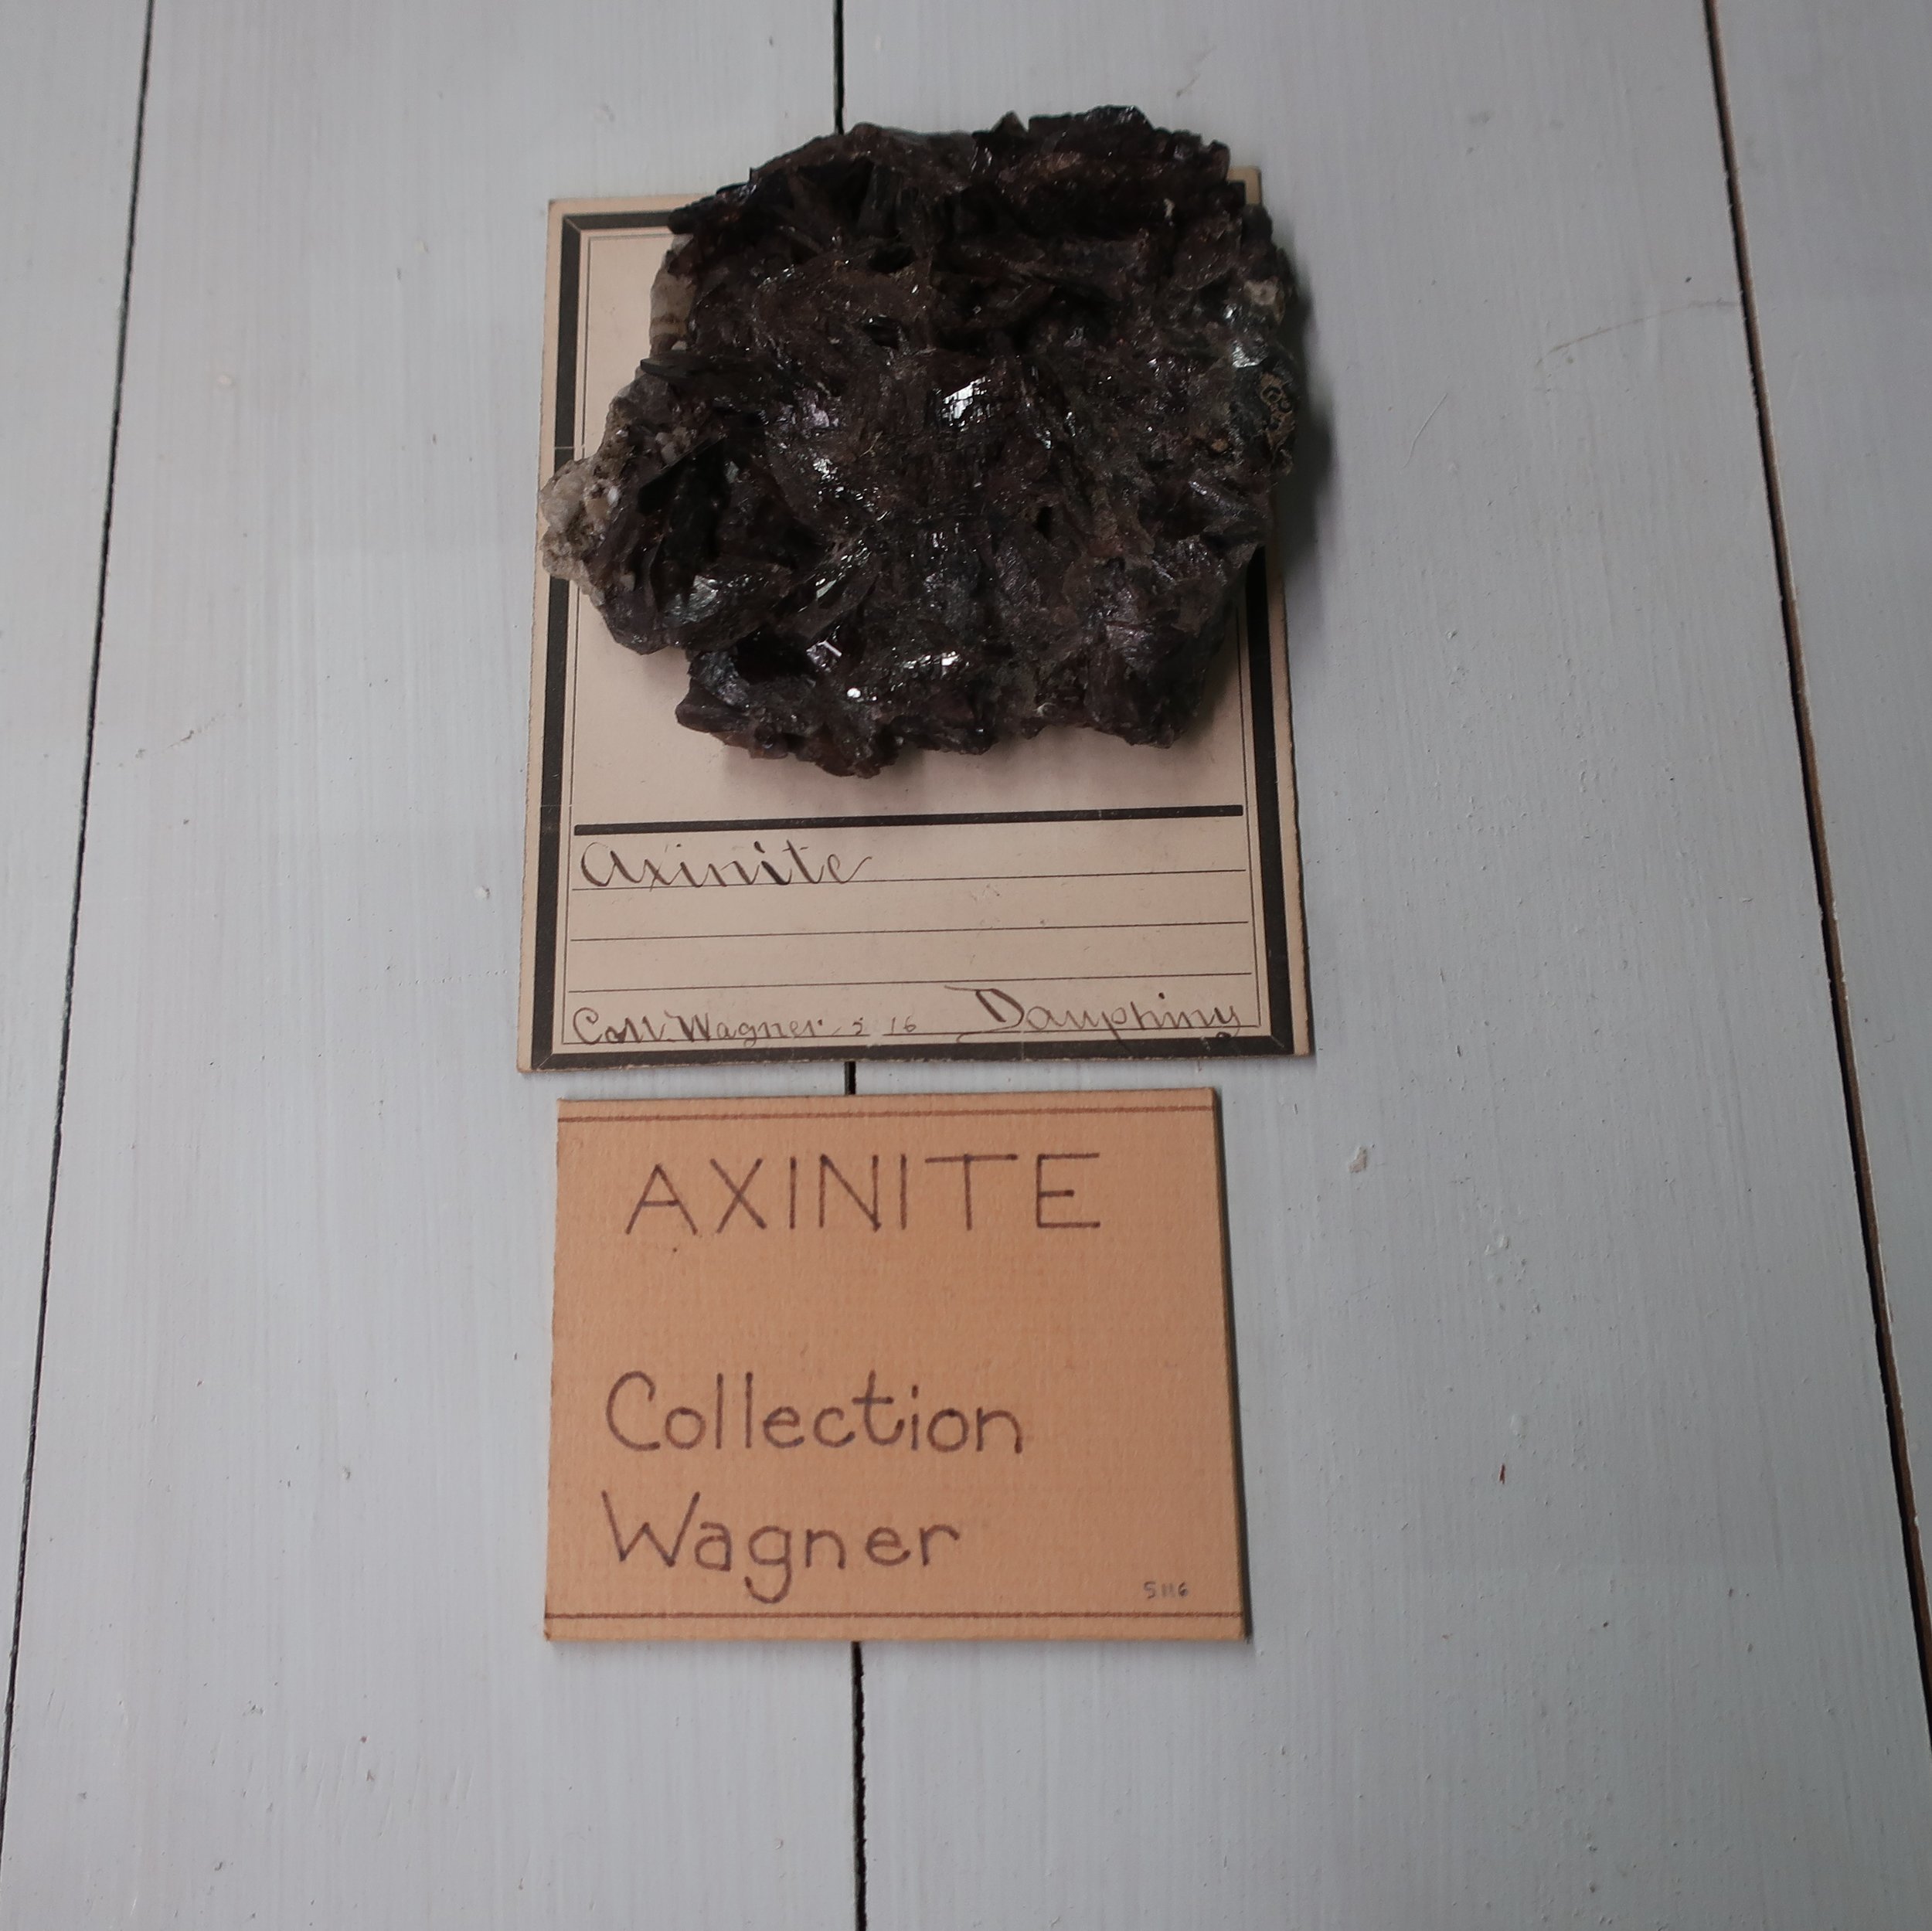  “ Axinite  contains Silica 50, Alumina 16, Lime 17, Iron 9 Manganeese 5. Sp. Gr. 3.27. This mineral rarely occurs massive, more frequently in flat, oblique rhomboidal prisms, whose edges are remarkable sharp. Common colour violet, or clove brown, al